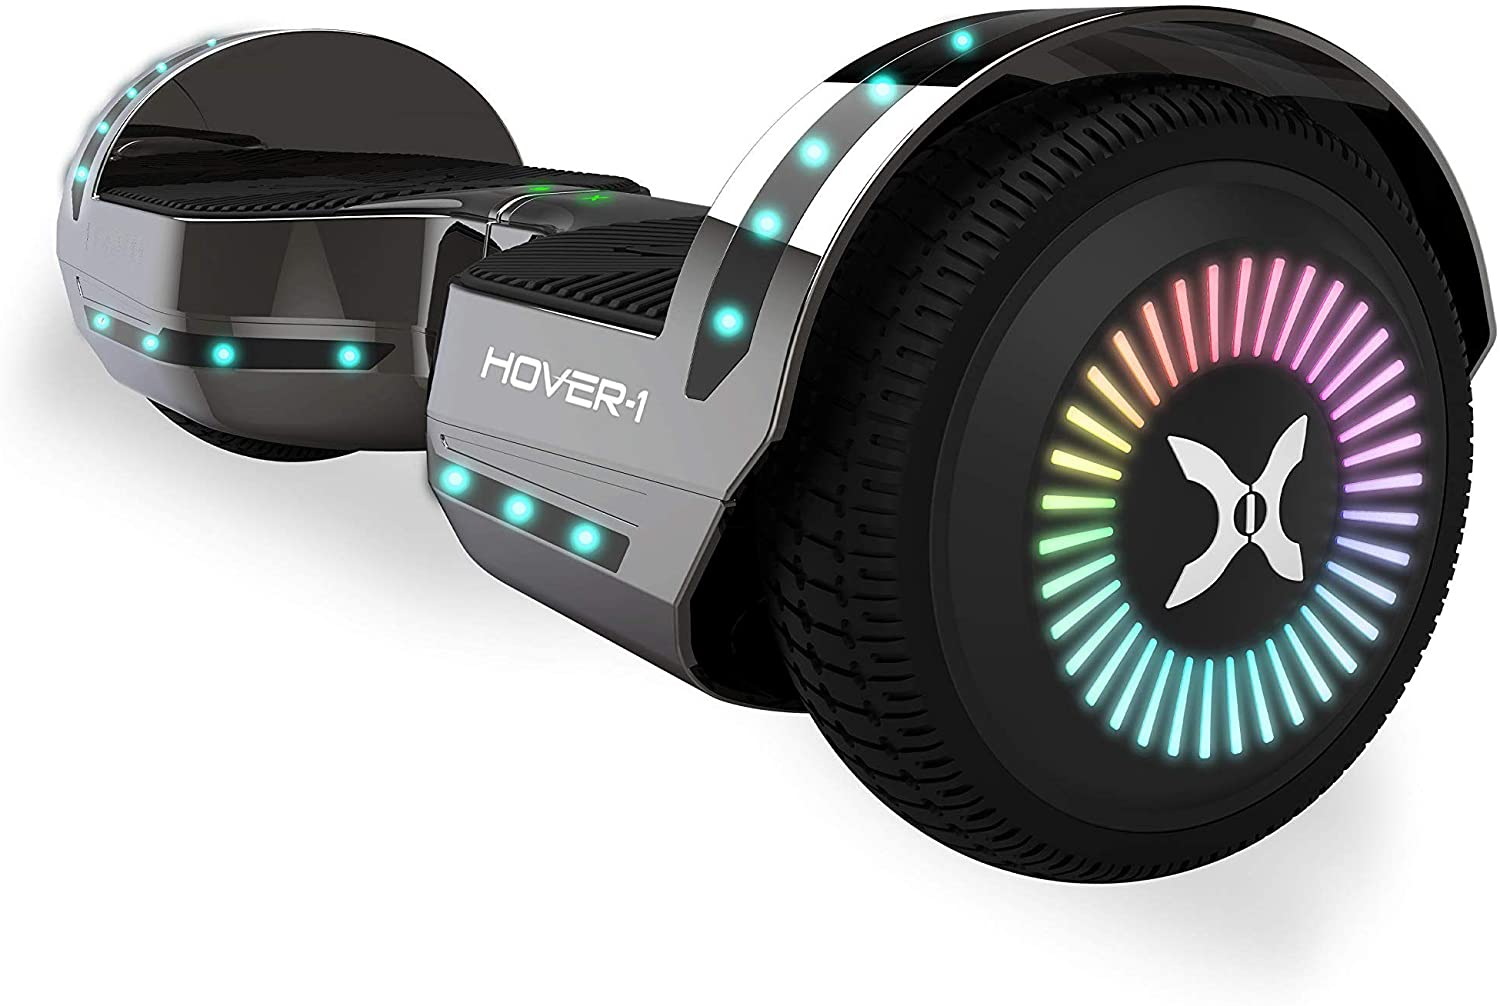 Hoverboard 6.5" UL 2272 Listed Two-Wheel Self Balancing Electric Scooter with LED Light Pink